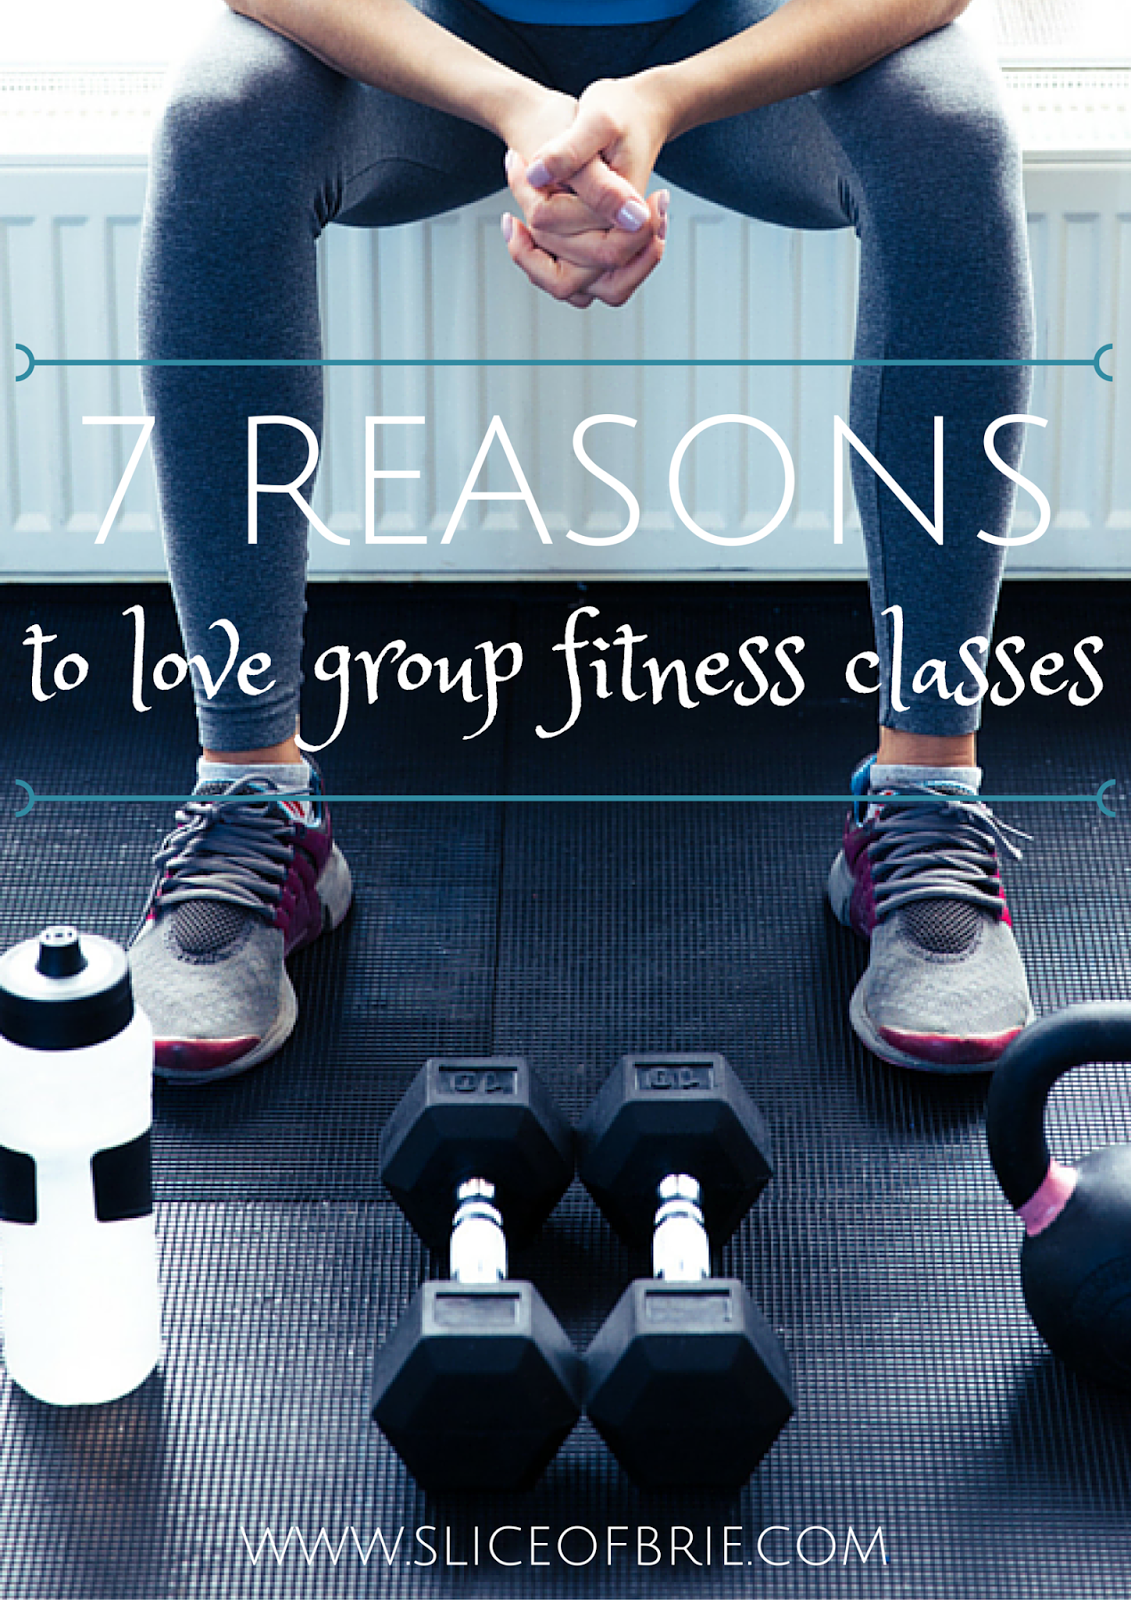 7 Reasons to love group fitness classes via A Slice of Brie